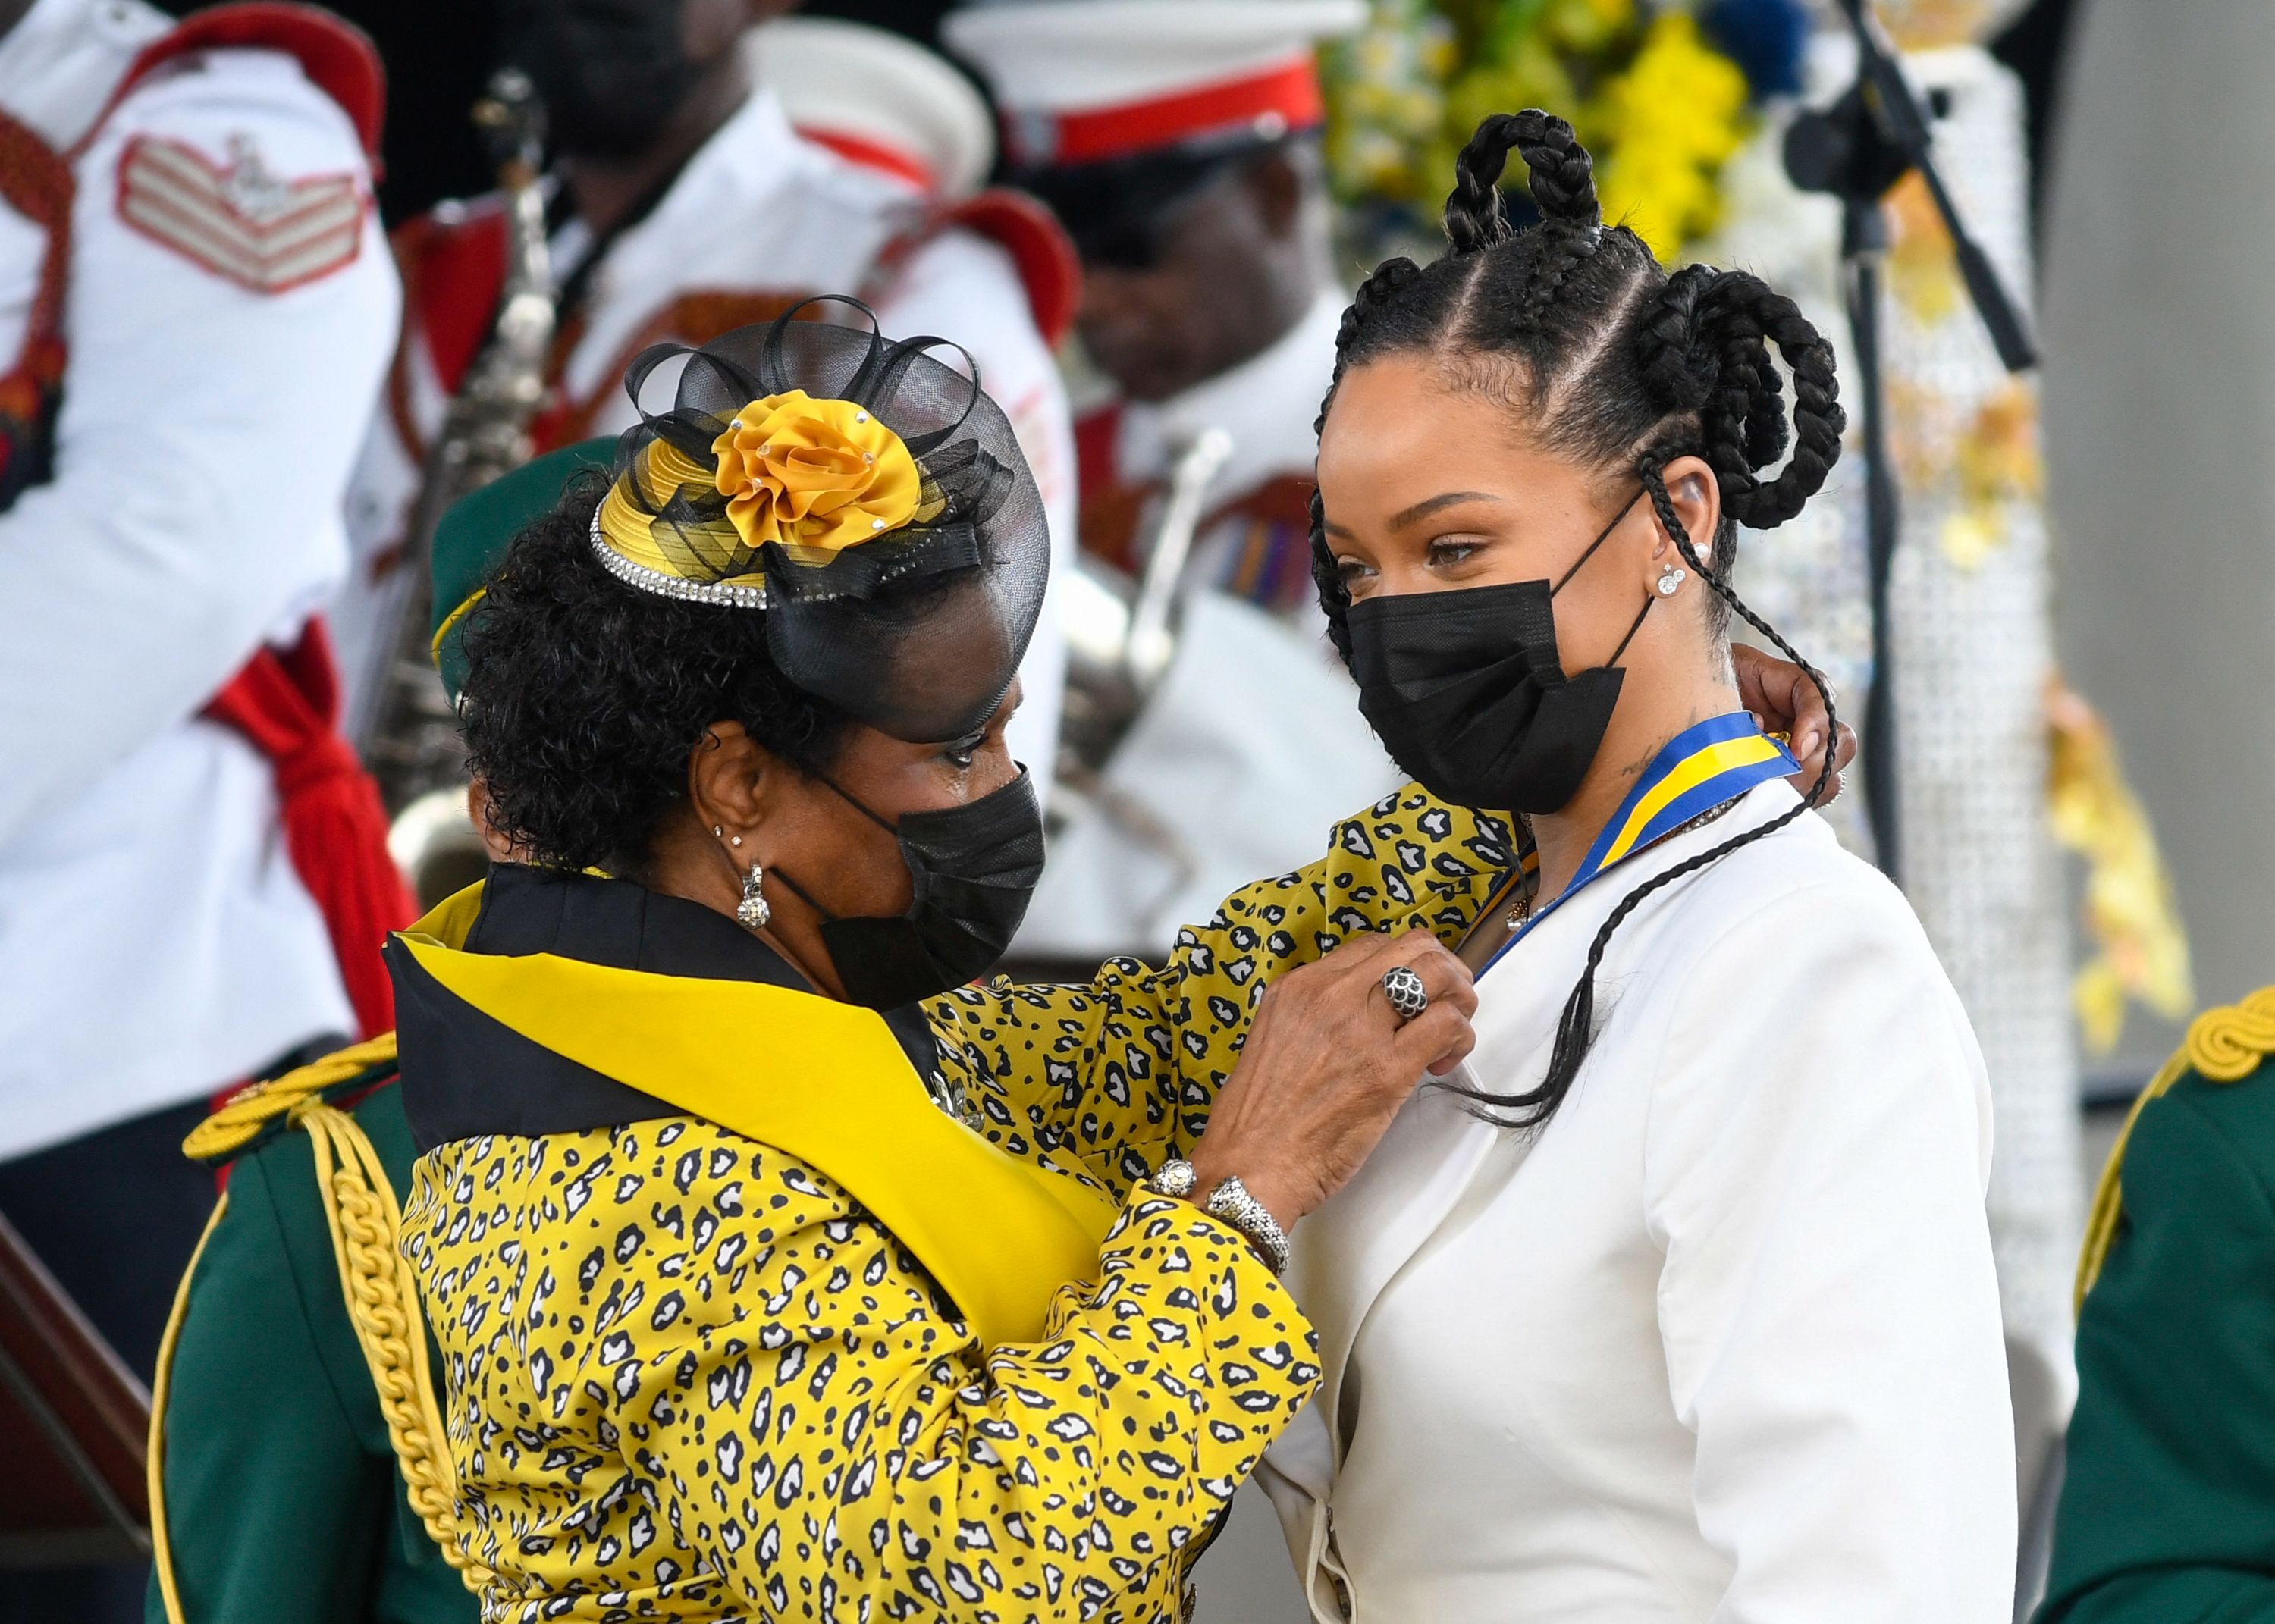 Rihanna Fenty being conferred with the honour of Barbados 11th National Hero by President Dame Sandra Mason